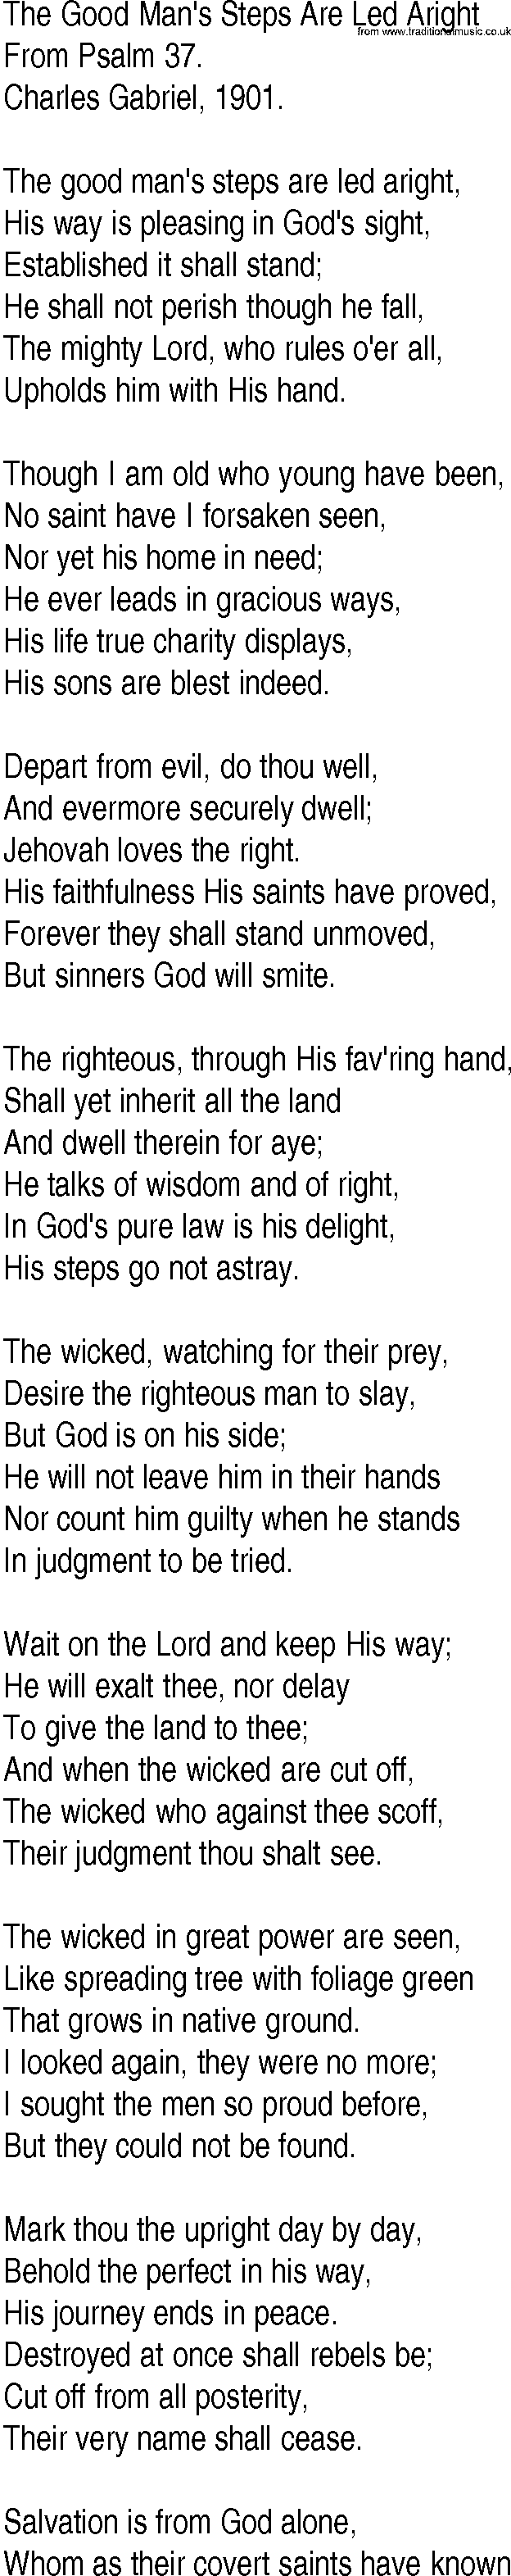 Hymn and Gospel Song: The Good Man's Steps Are Led Aright by From Psalm lyrics